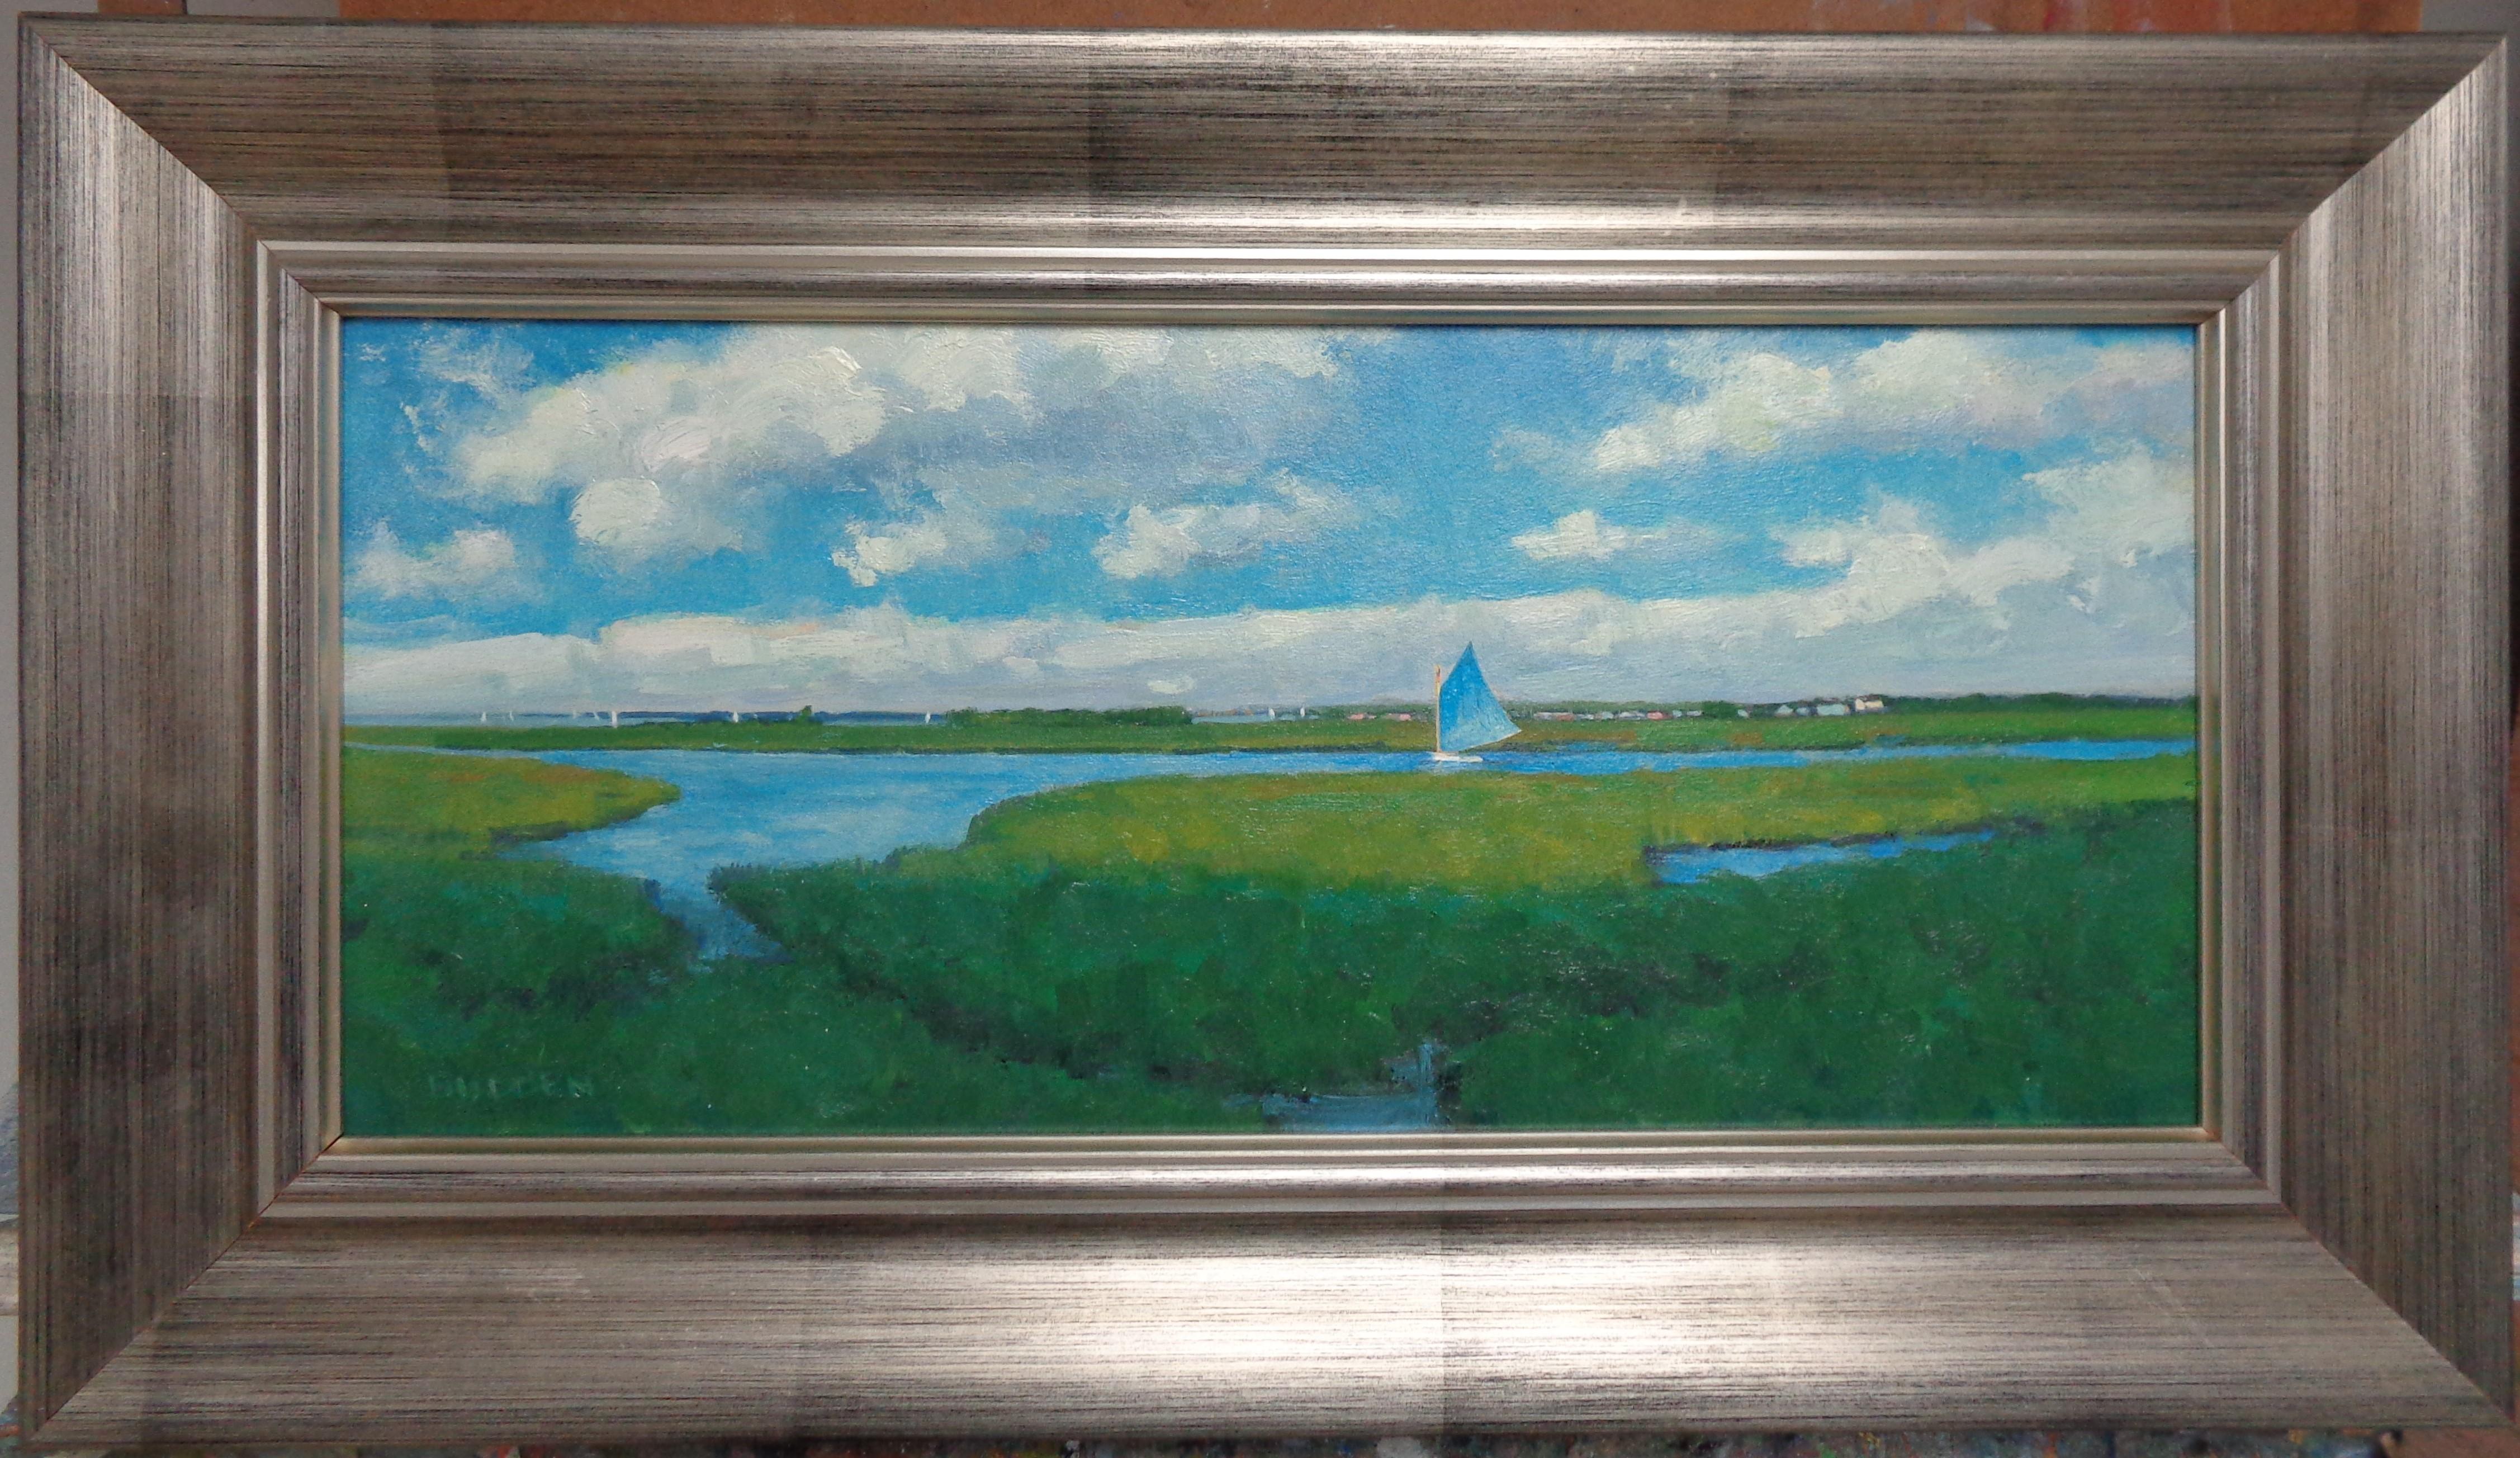 A Good Sailing Day
oil/panel
13.5 x 23.75 framed
An oil painting on canvas by award winning contemporary artist Michael Budden that showcases a unique composition of  life on the back water on a summer day created in an impressionistic realism